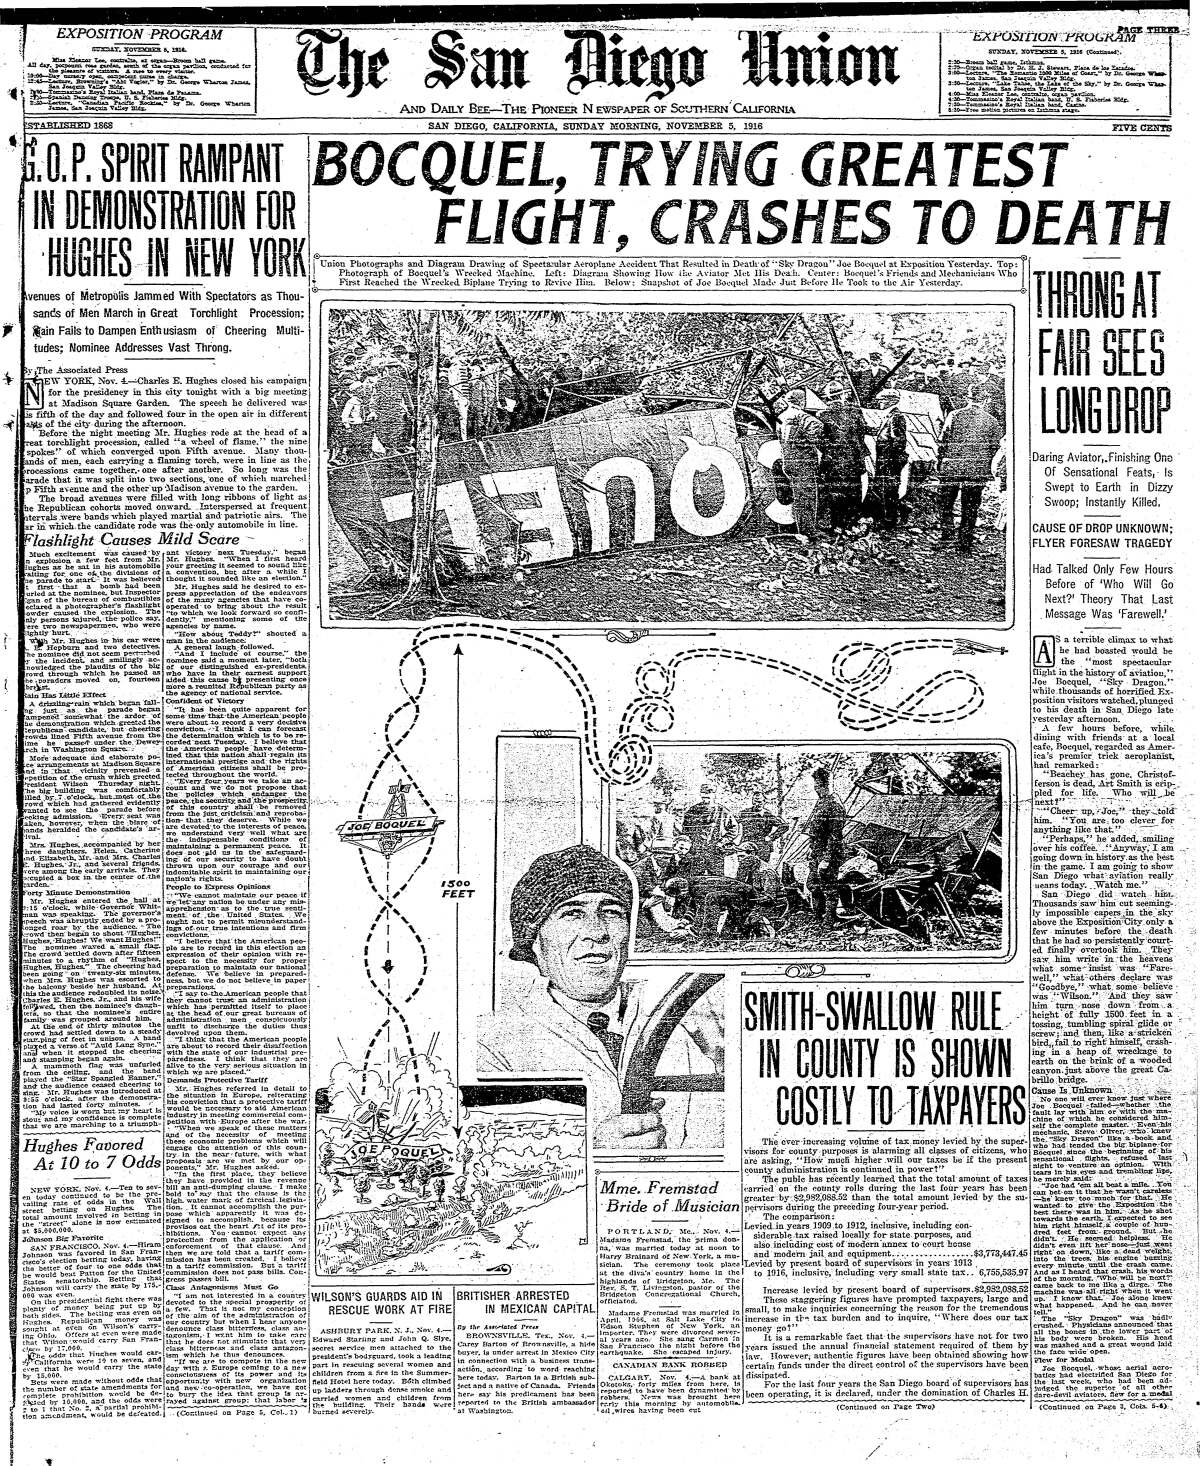 Front page of The San Diego Union and Daily Bee, Nov. 5, 1916.